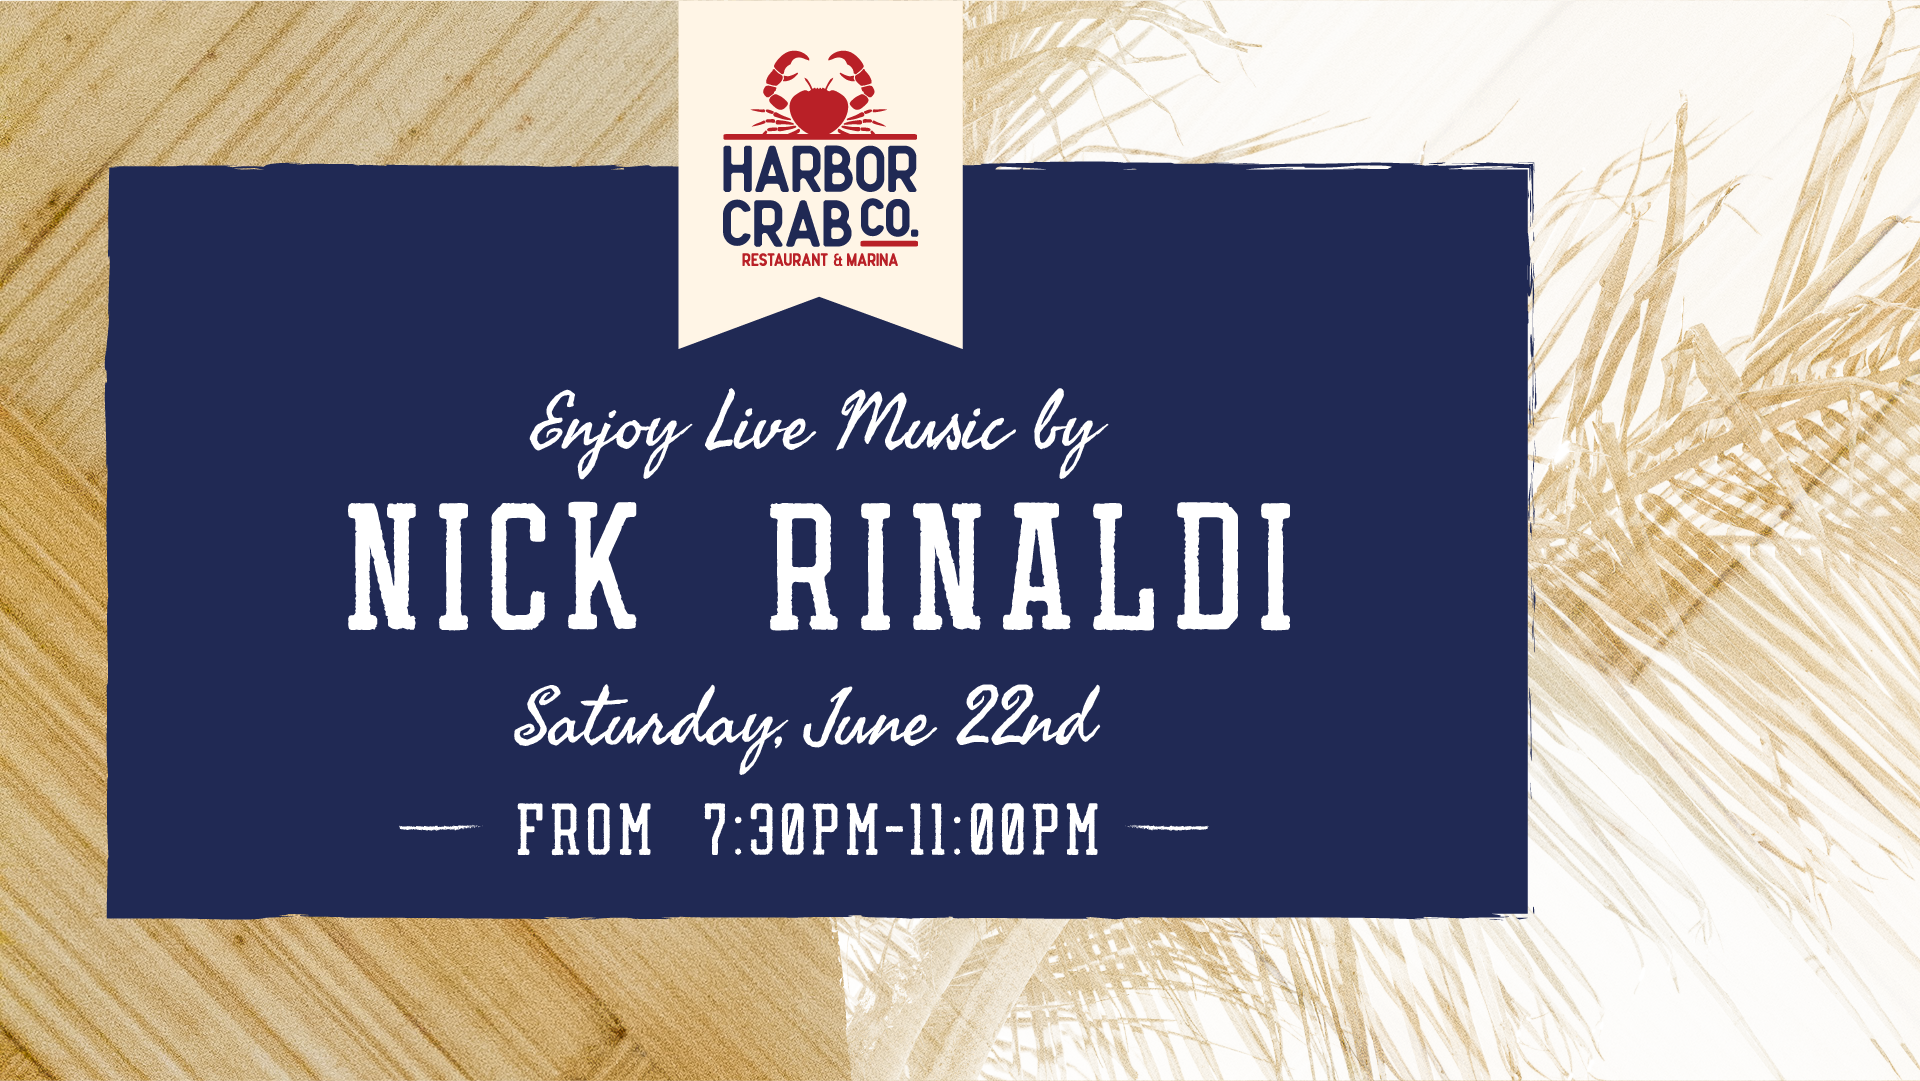 Live music by Nick Rinaldi at Harbor Crab on June 22nd from 7:30pm-11pm.